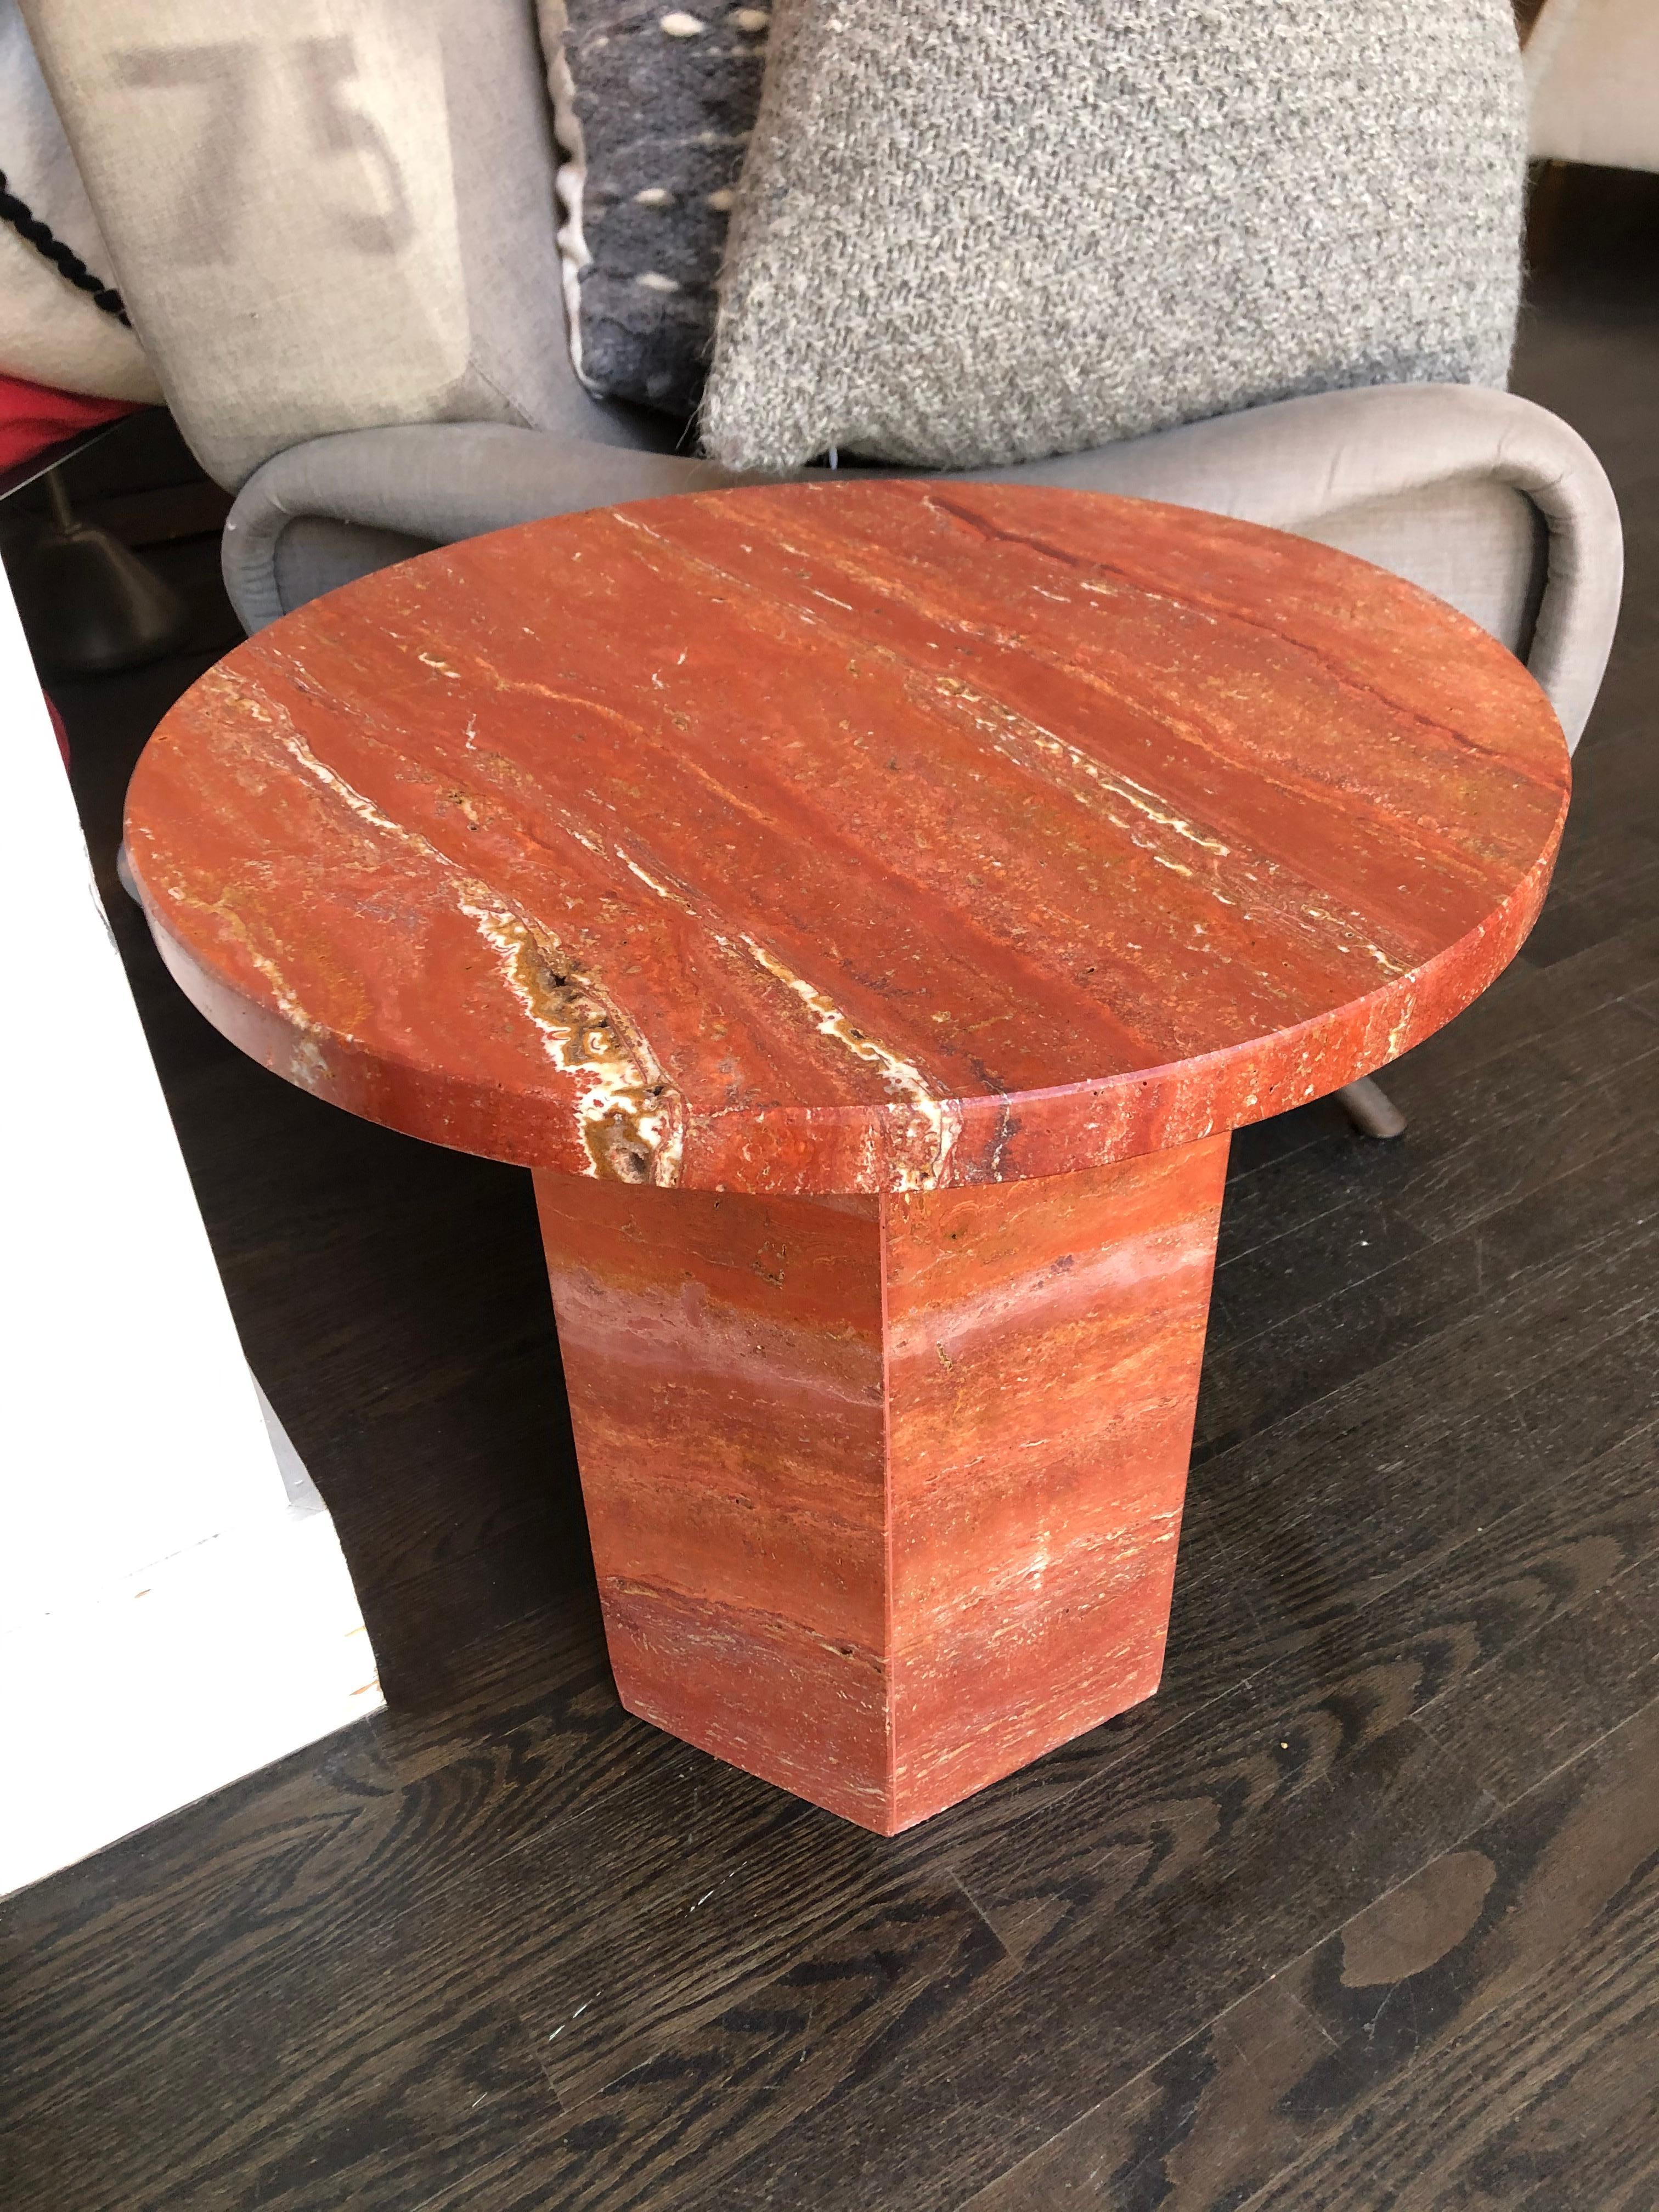 Red travertine marble side table by Le Lampade
Designed and Made in Italy
Round travertine top on an hexagonal bae.
Base and top can be custom made up on request.